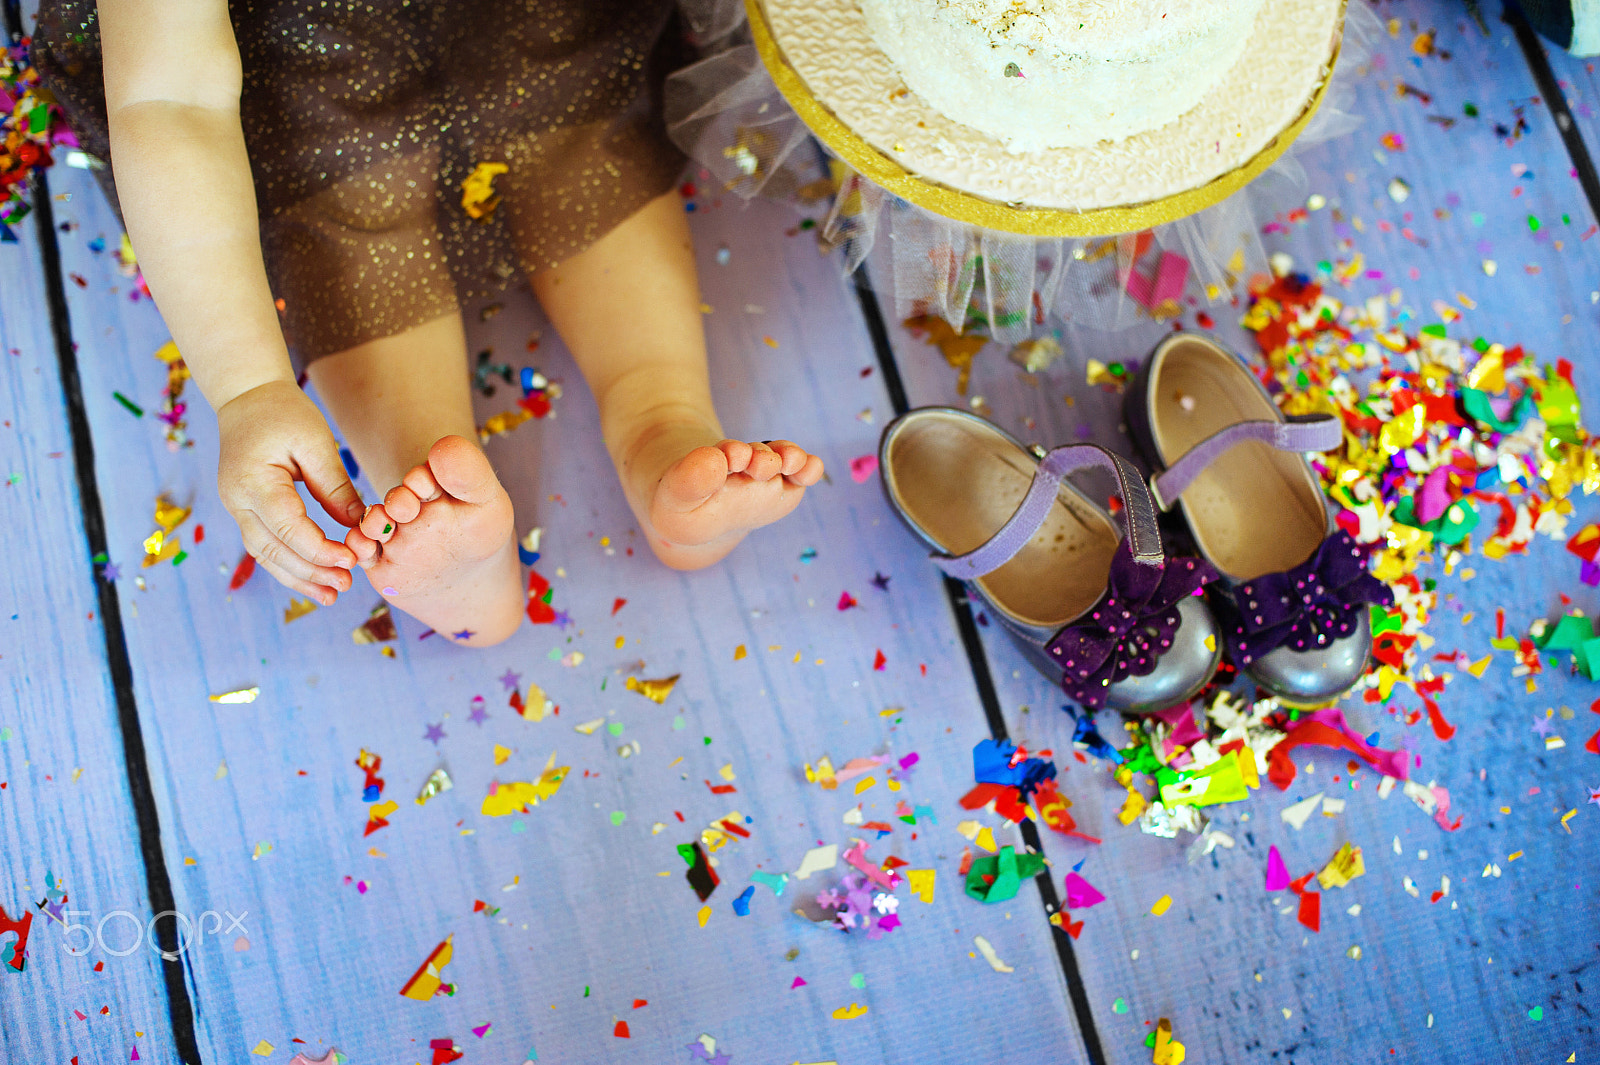 Nikon D700 sample photo. Kid barefooted legs in against the confetti and garlands - selective focus, copy space photography